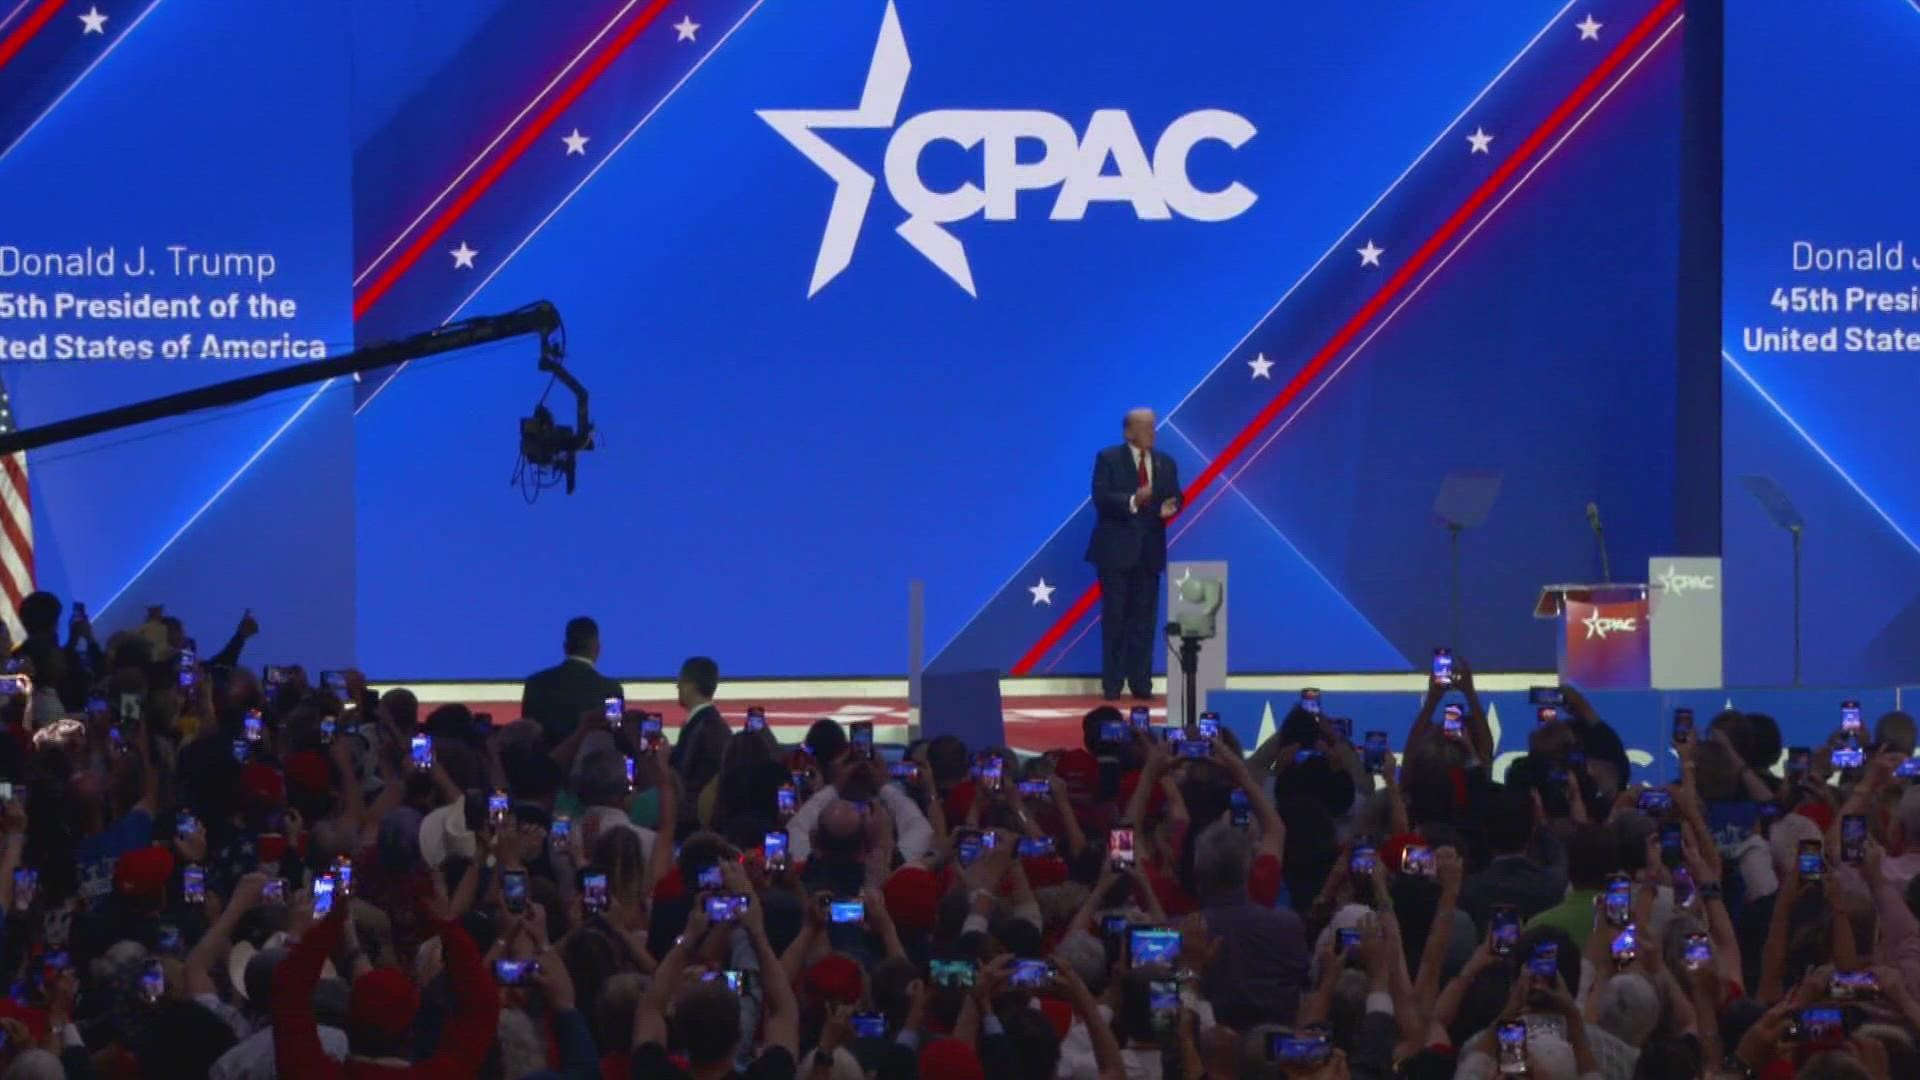 The Conservative Political Action Conference wrapped up in Dallas on Sunday.